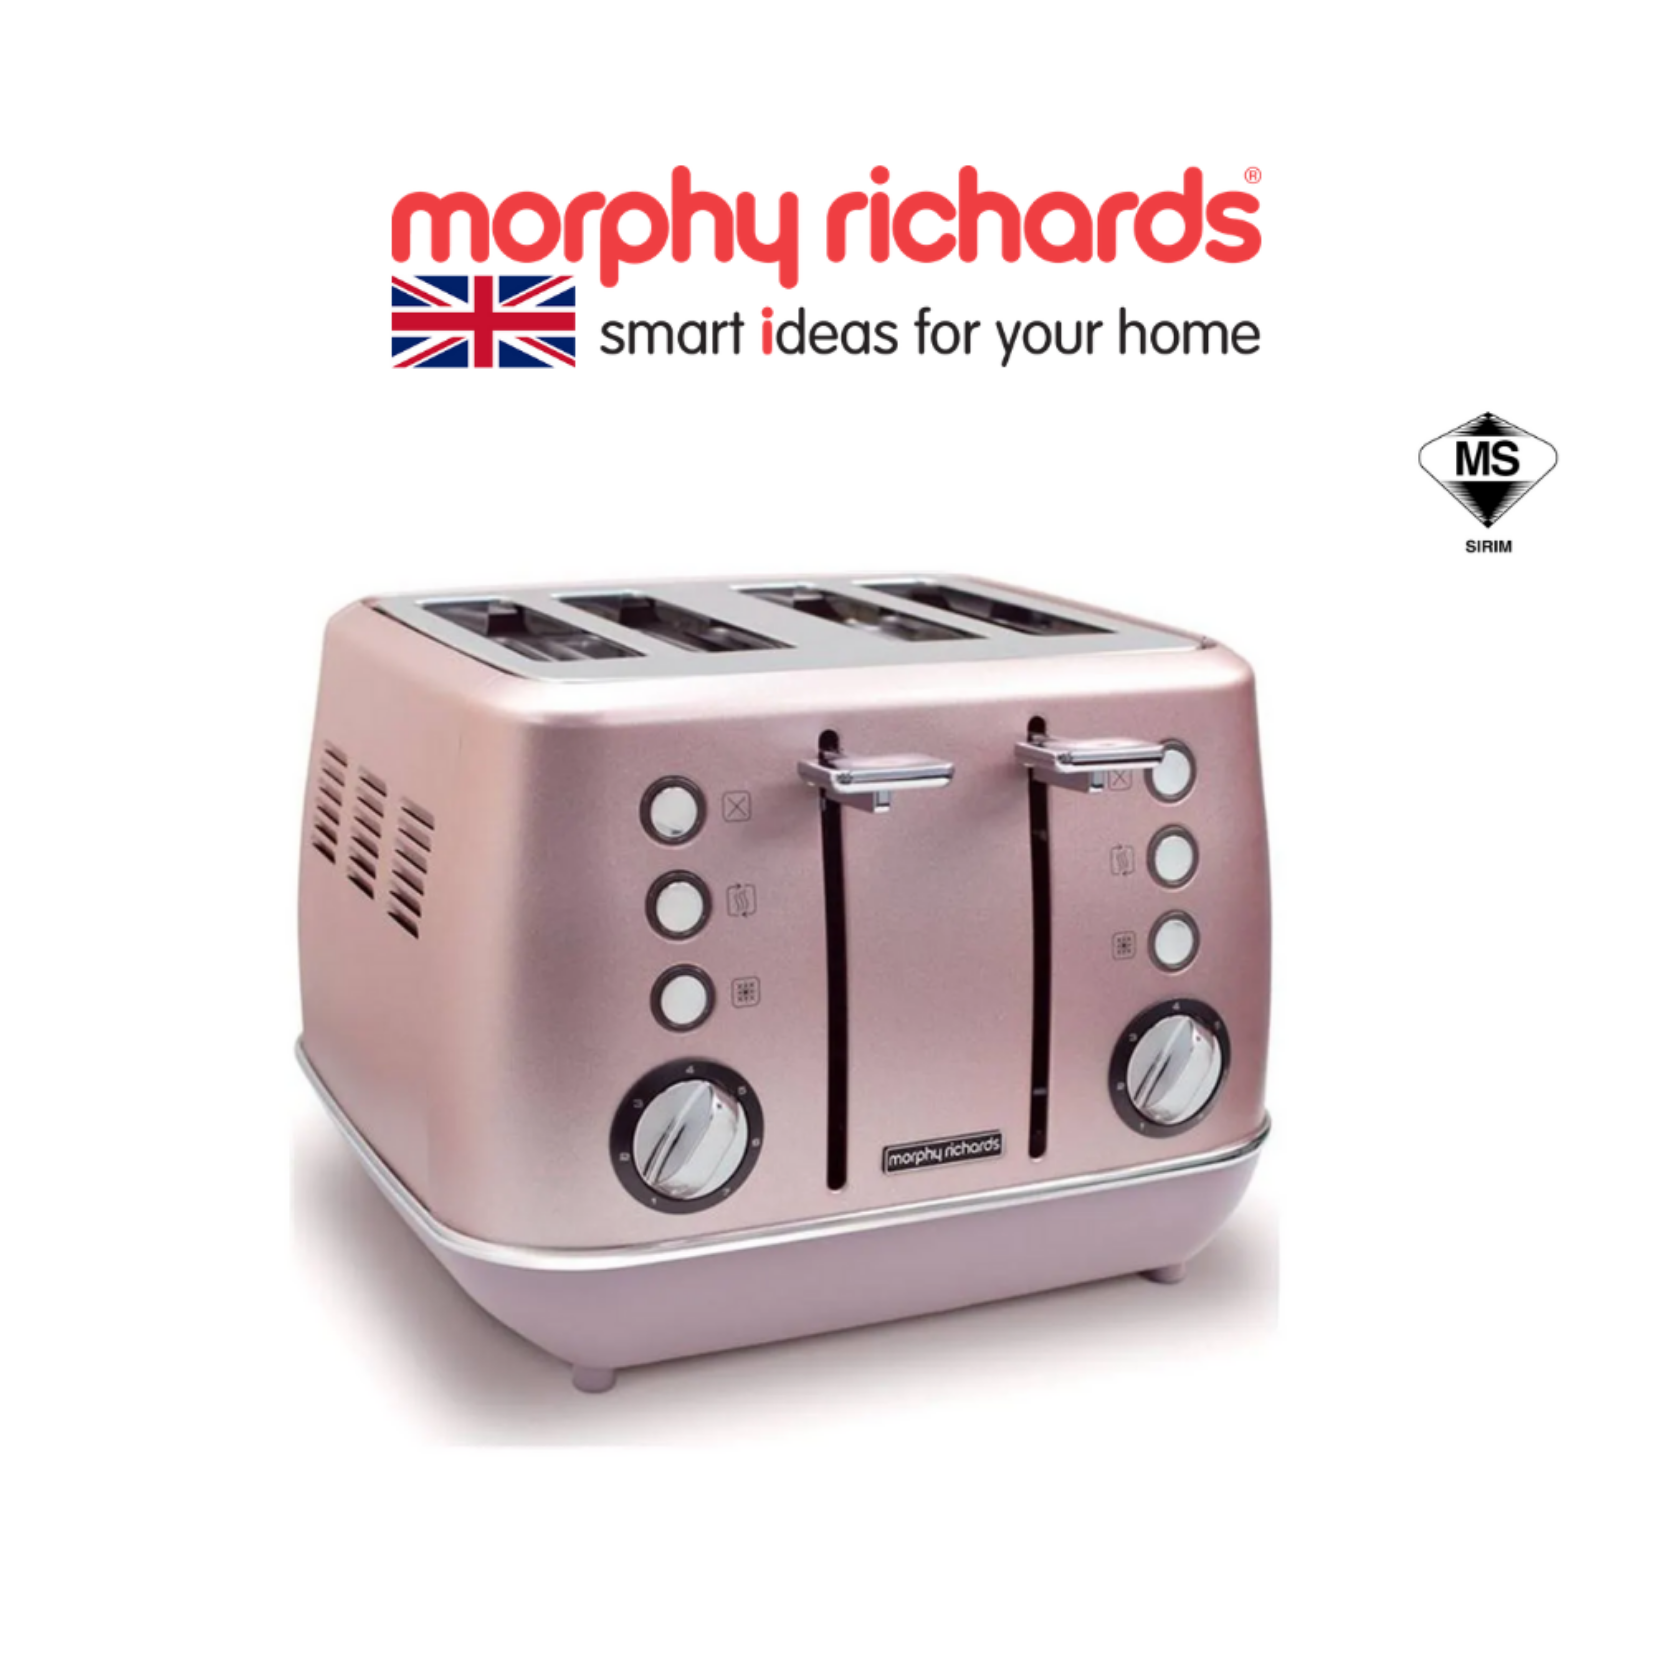 Morphy Richards Evoke 4 Slice Toaster Rose Quartz - Variable Browning Control | Removable Crumb Tray | Cord Storage